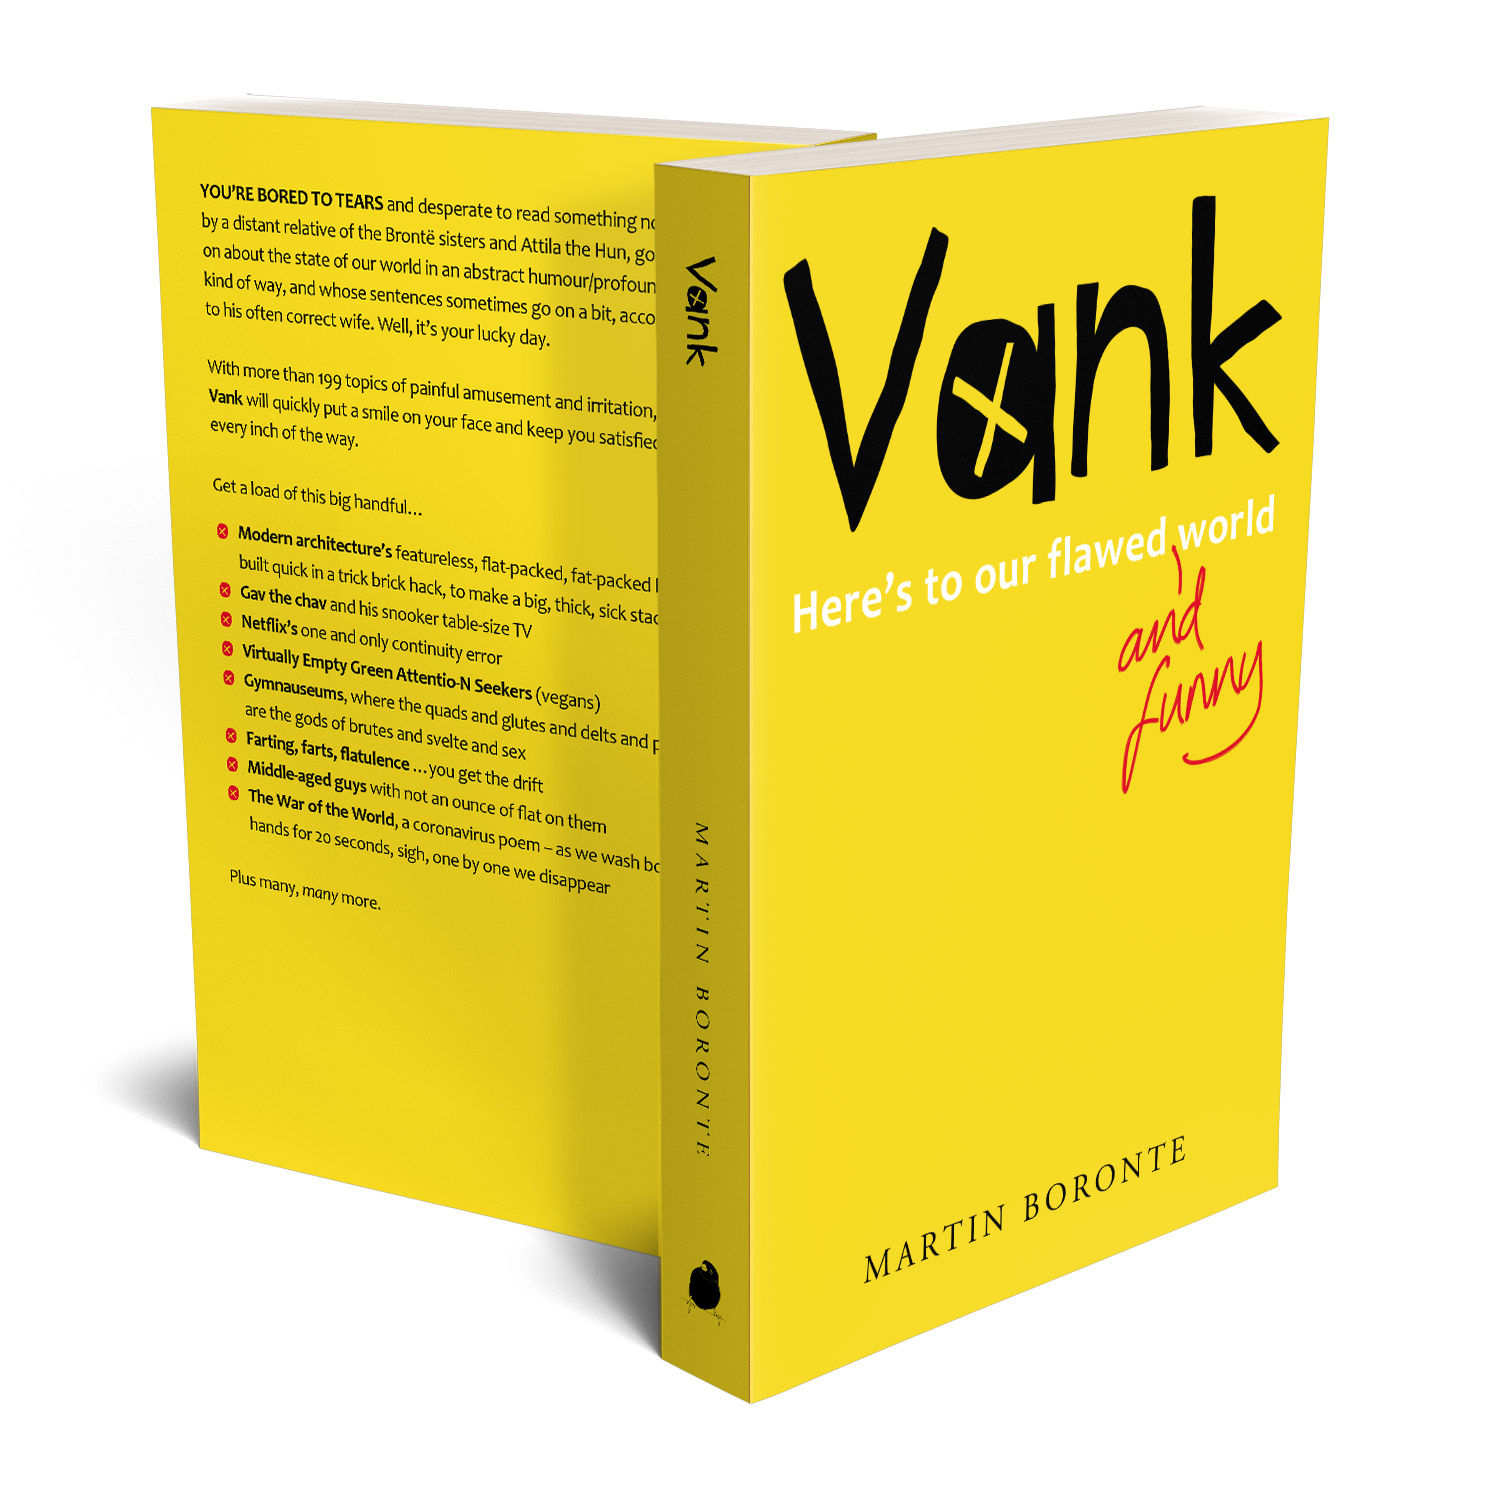 'Vank' is an hilarious collection of observations on - relatively - modern life! The author and illustrator is Martin Boronte. The cover design and interior manuscript formatting are by Mark Thomas. Learn what Mark could do for your book by visiting coverness.com.